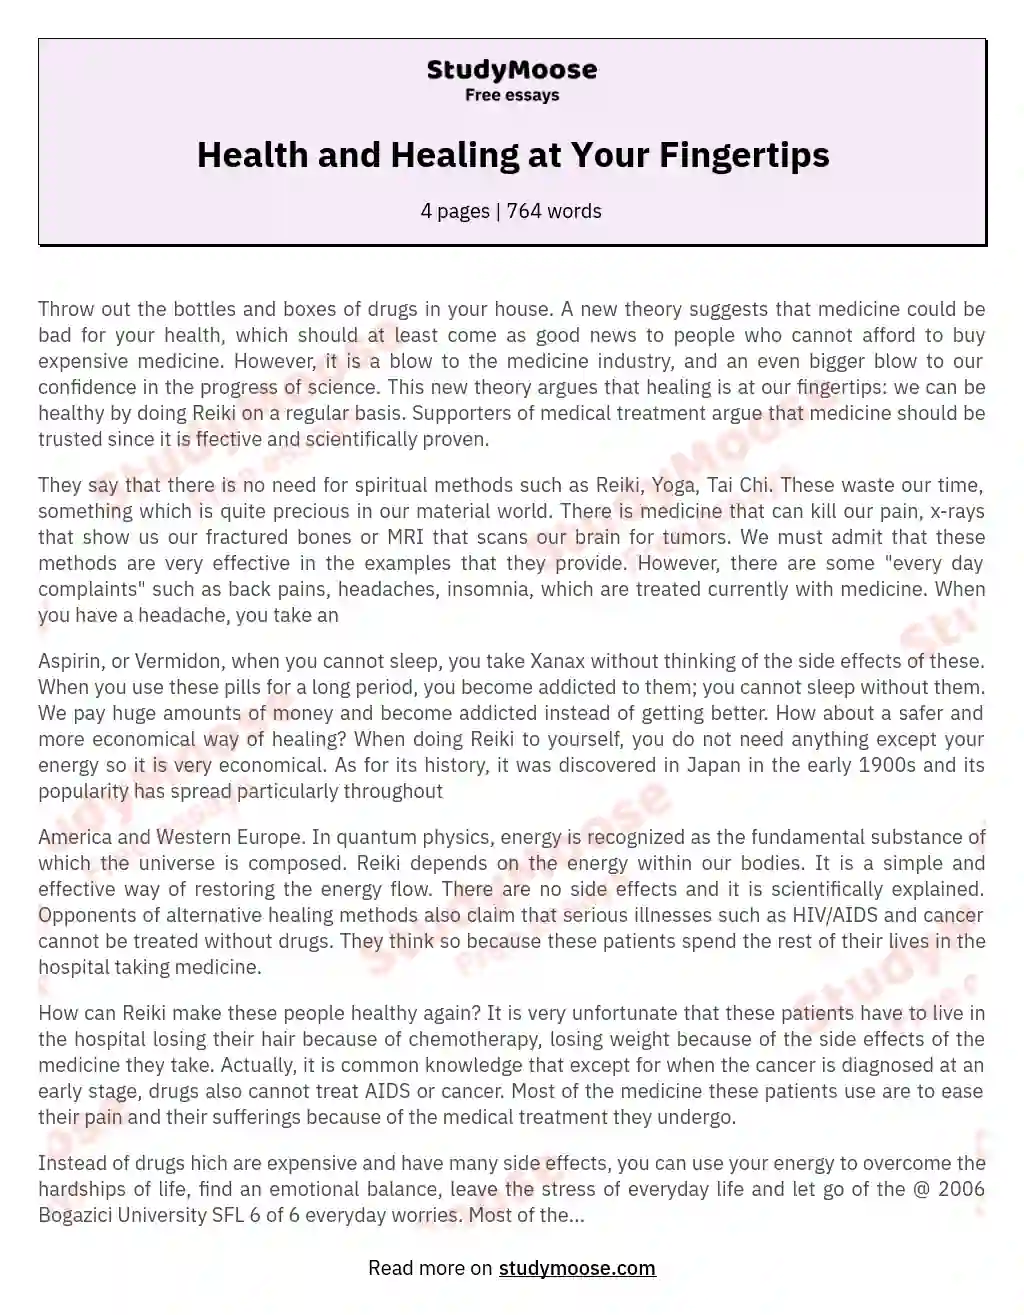 Health and Healing at Your Fingertips essay